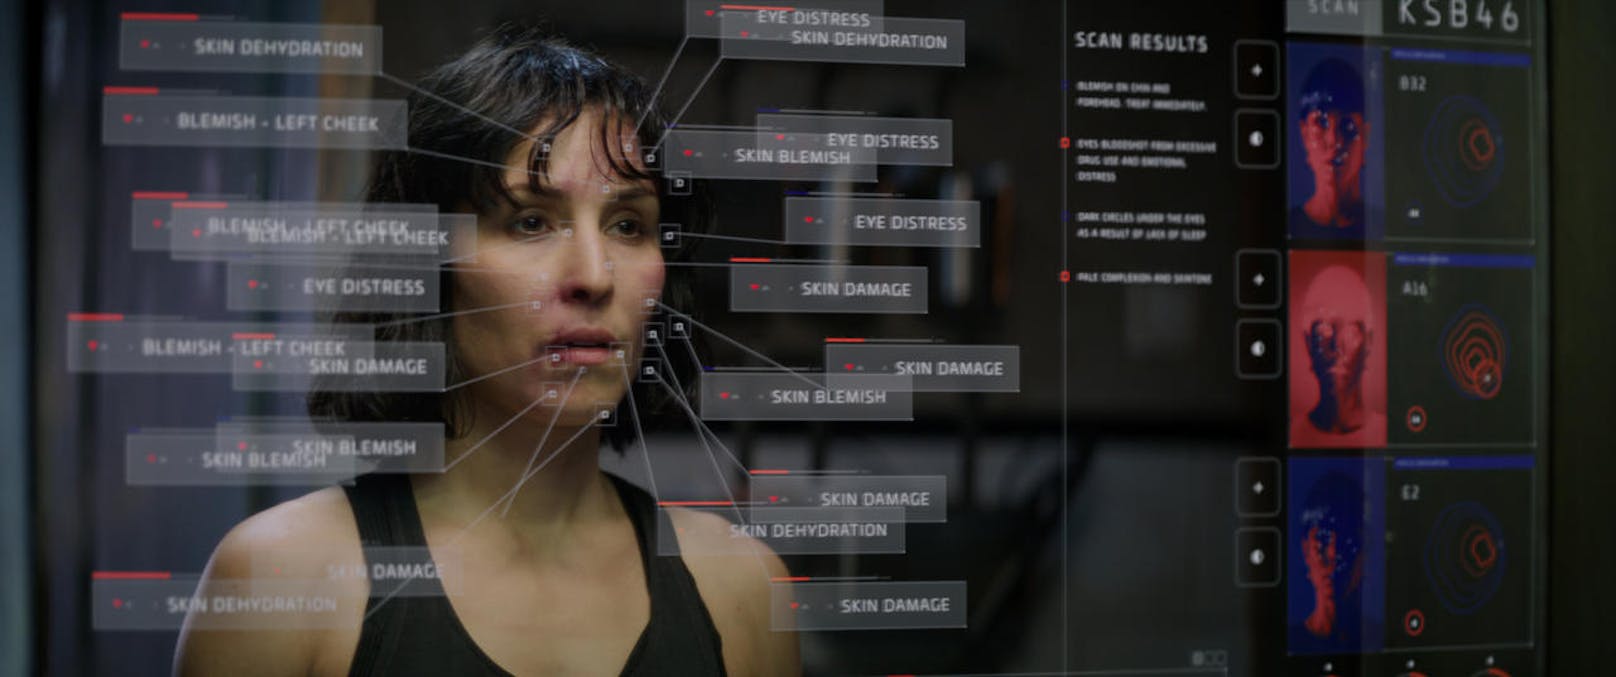 Noomi Rapace in "What Happened to Monday" (Splendid Film GmbH)